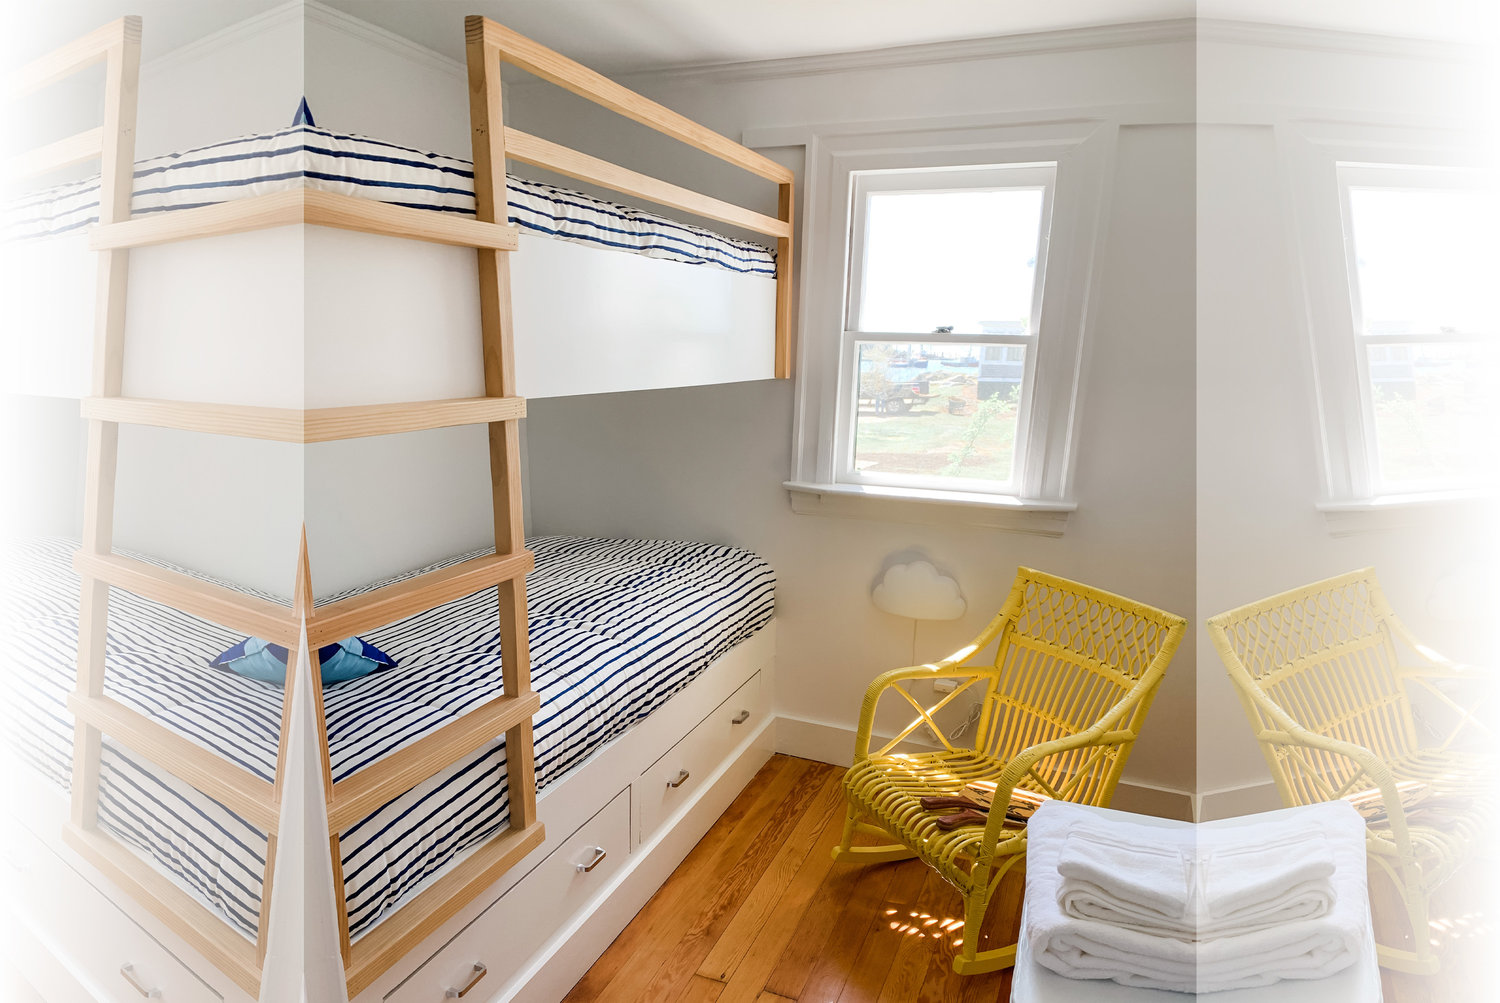 Bunk beds with storage  are ideal for small spaces